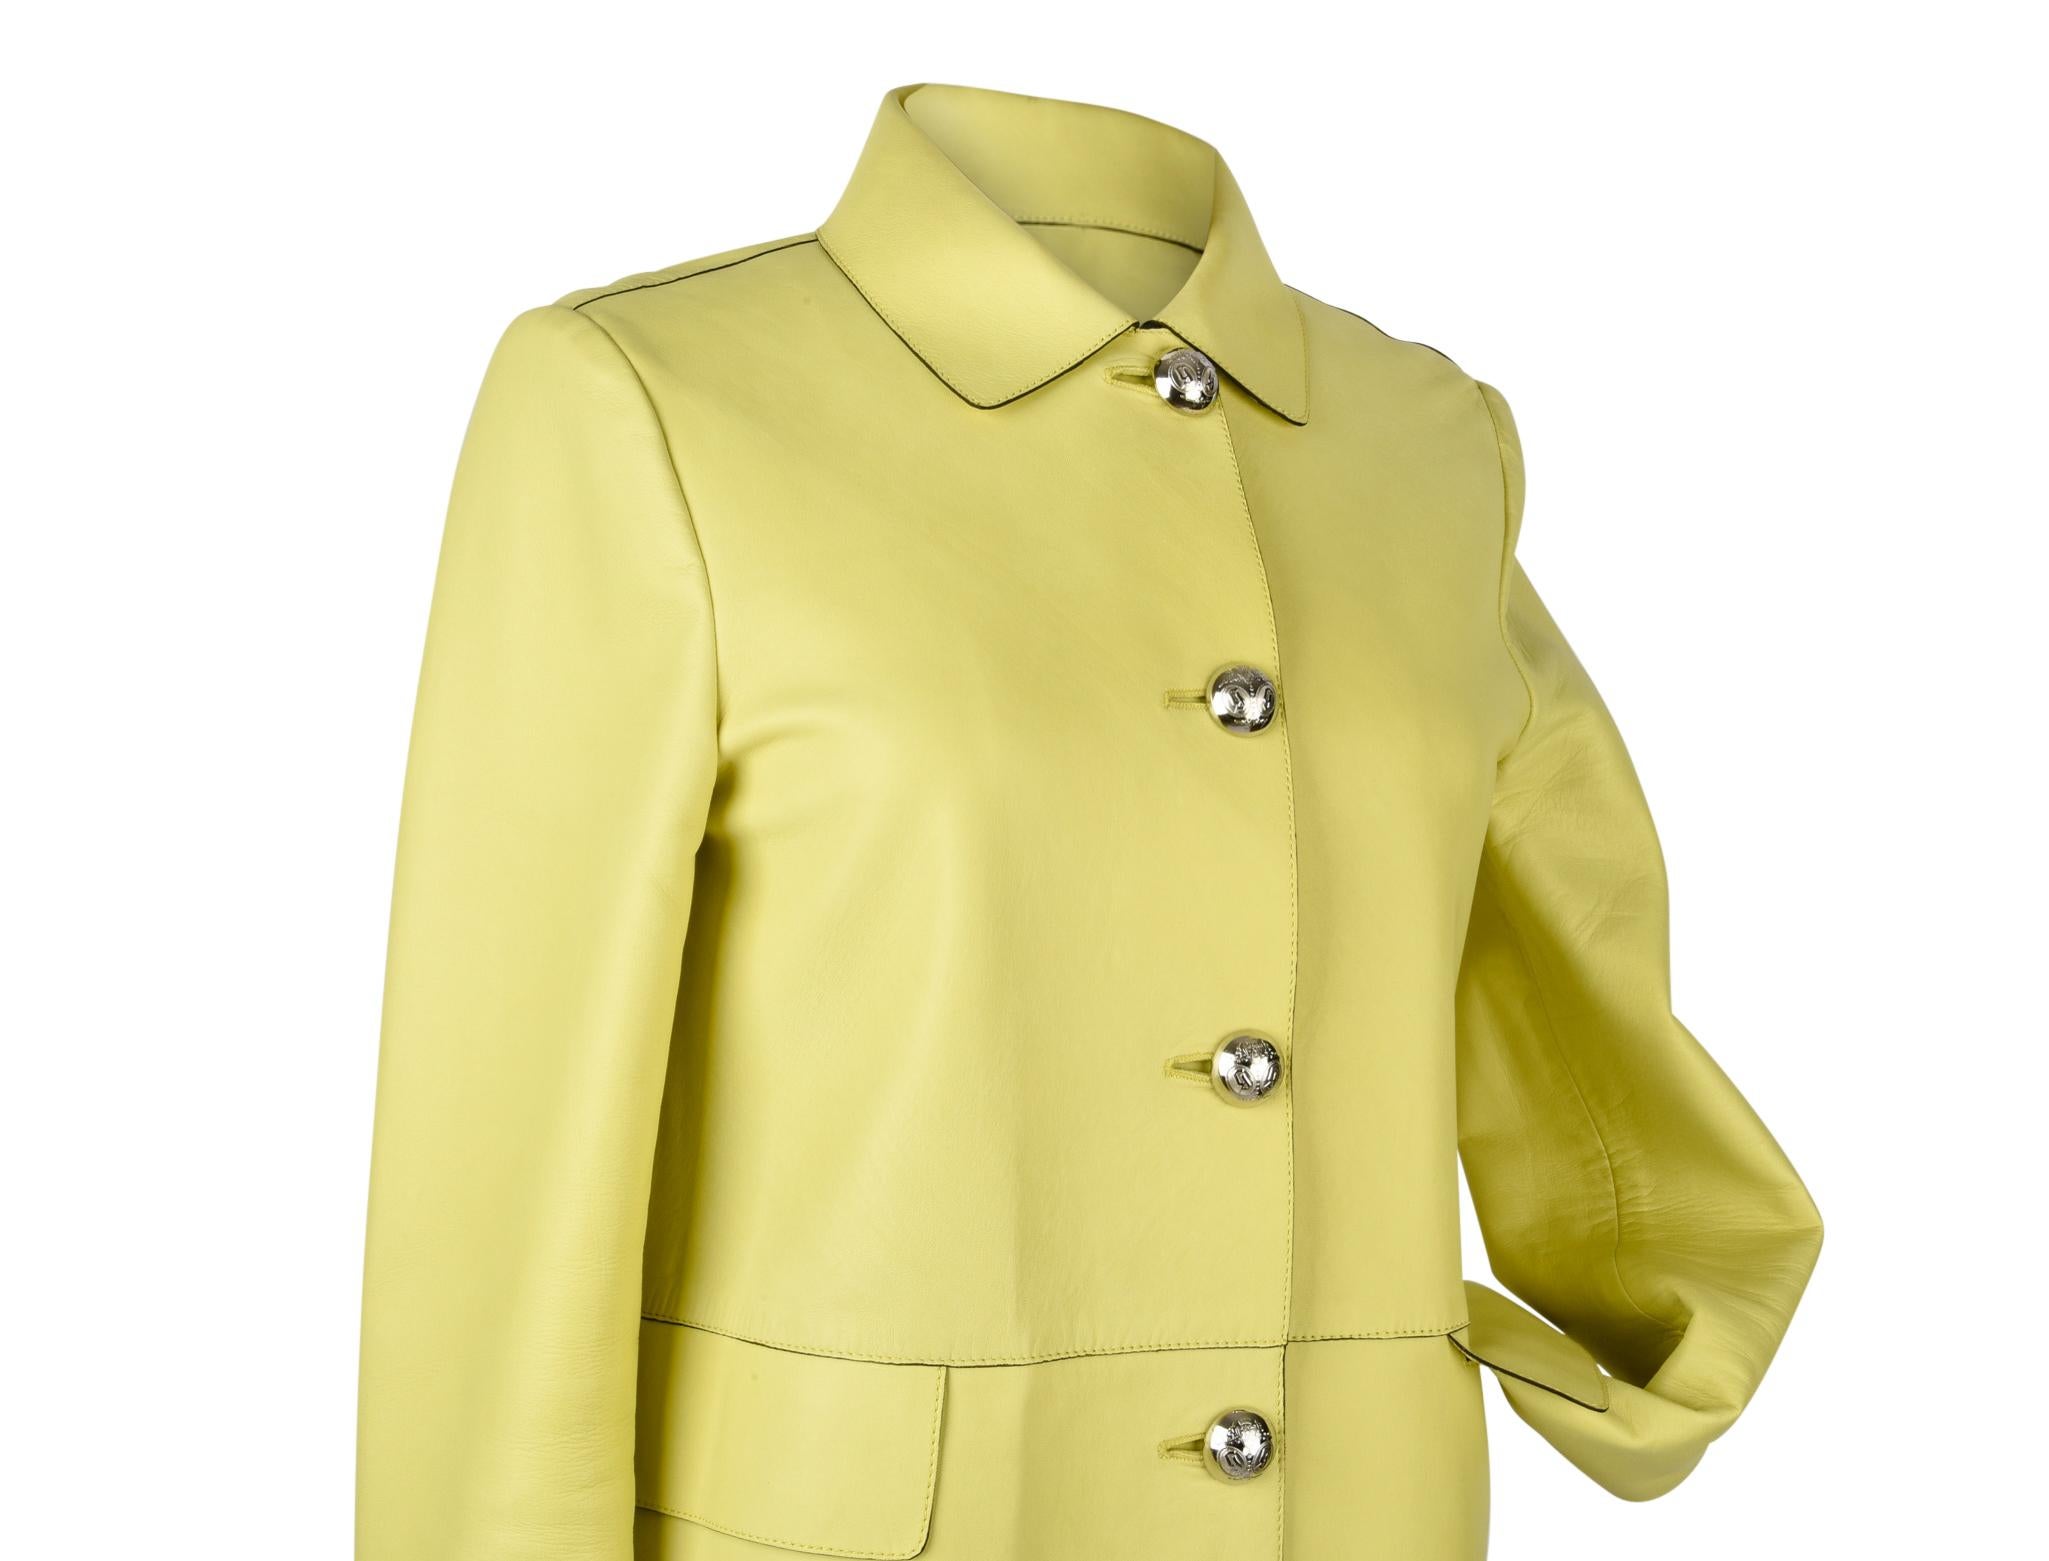 Guaranteed authentic Gucci yellow lambskin coat.  
Knee length and exquisitely soft.
5 silver embossed buttons and 2 flap pockets.
3 working buttons at cuffs.
Coat is not lined.
Fabric is lambskin.
Very light minor marks.
final sale          
  